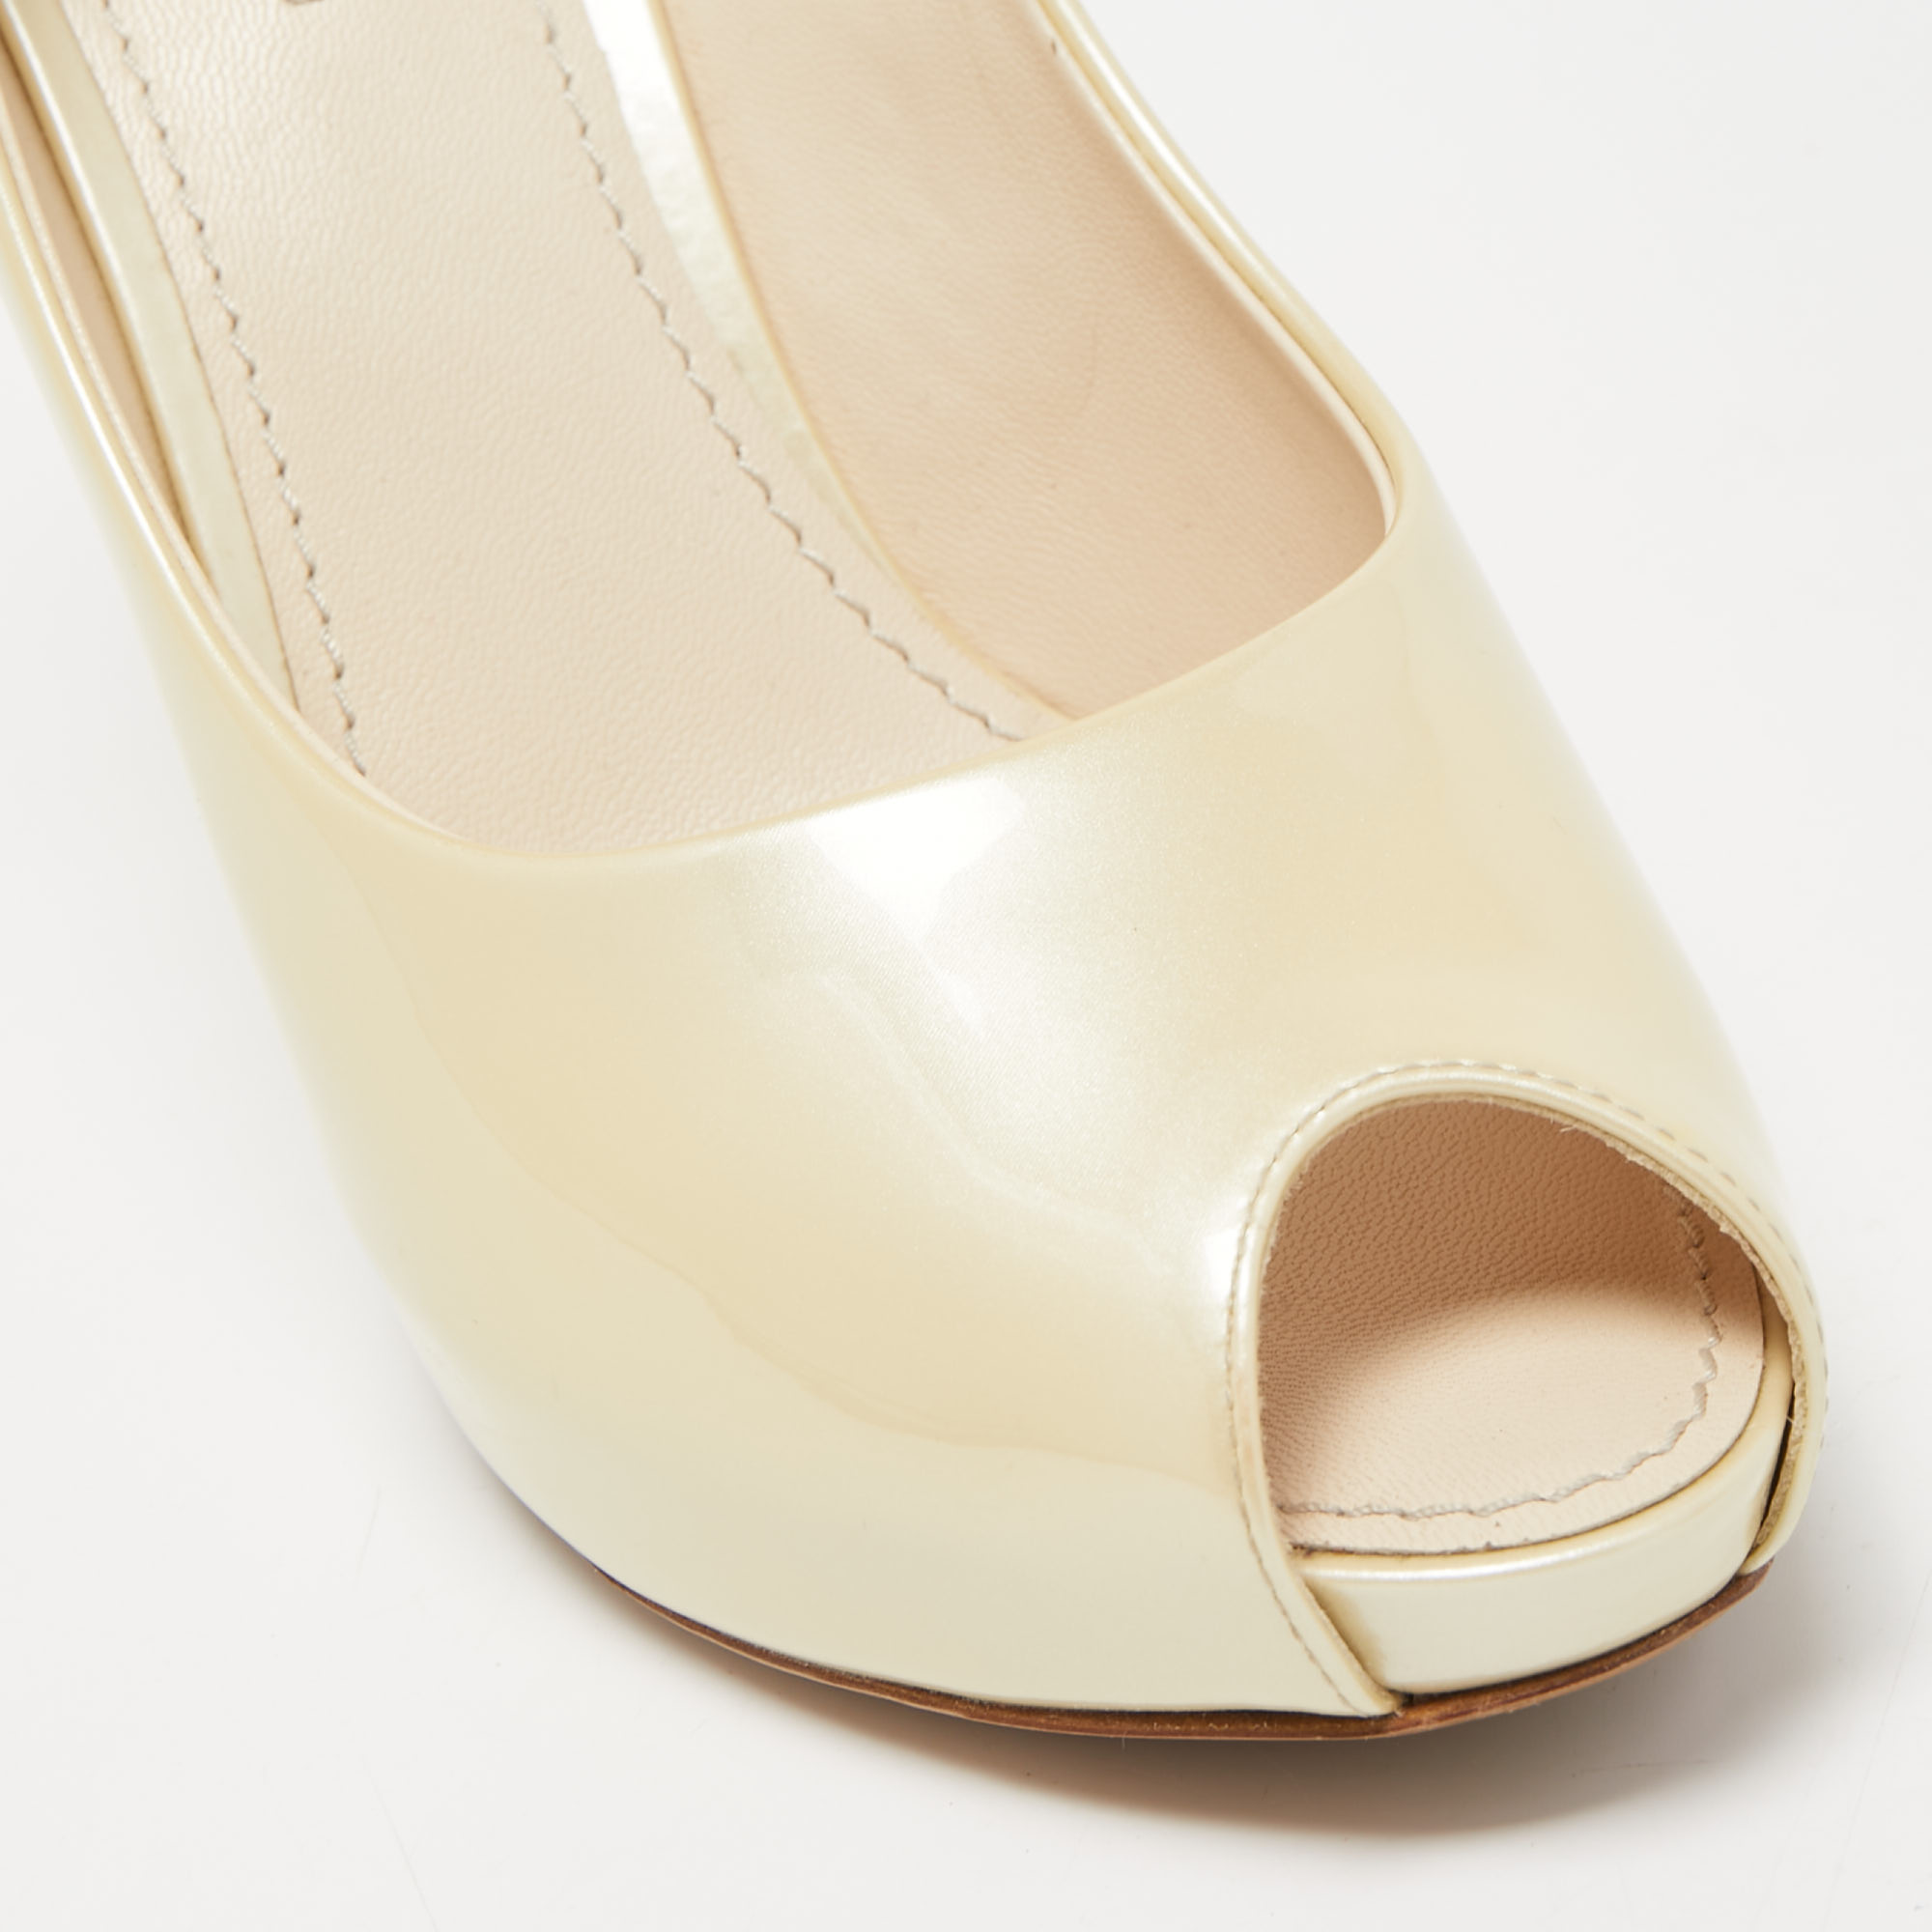 Louis Vuitton Cream Patent Leather Oh Really! Pumps Size 36.5